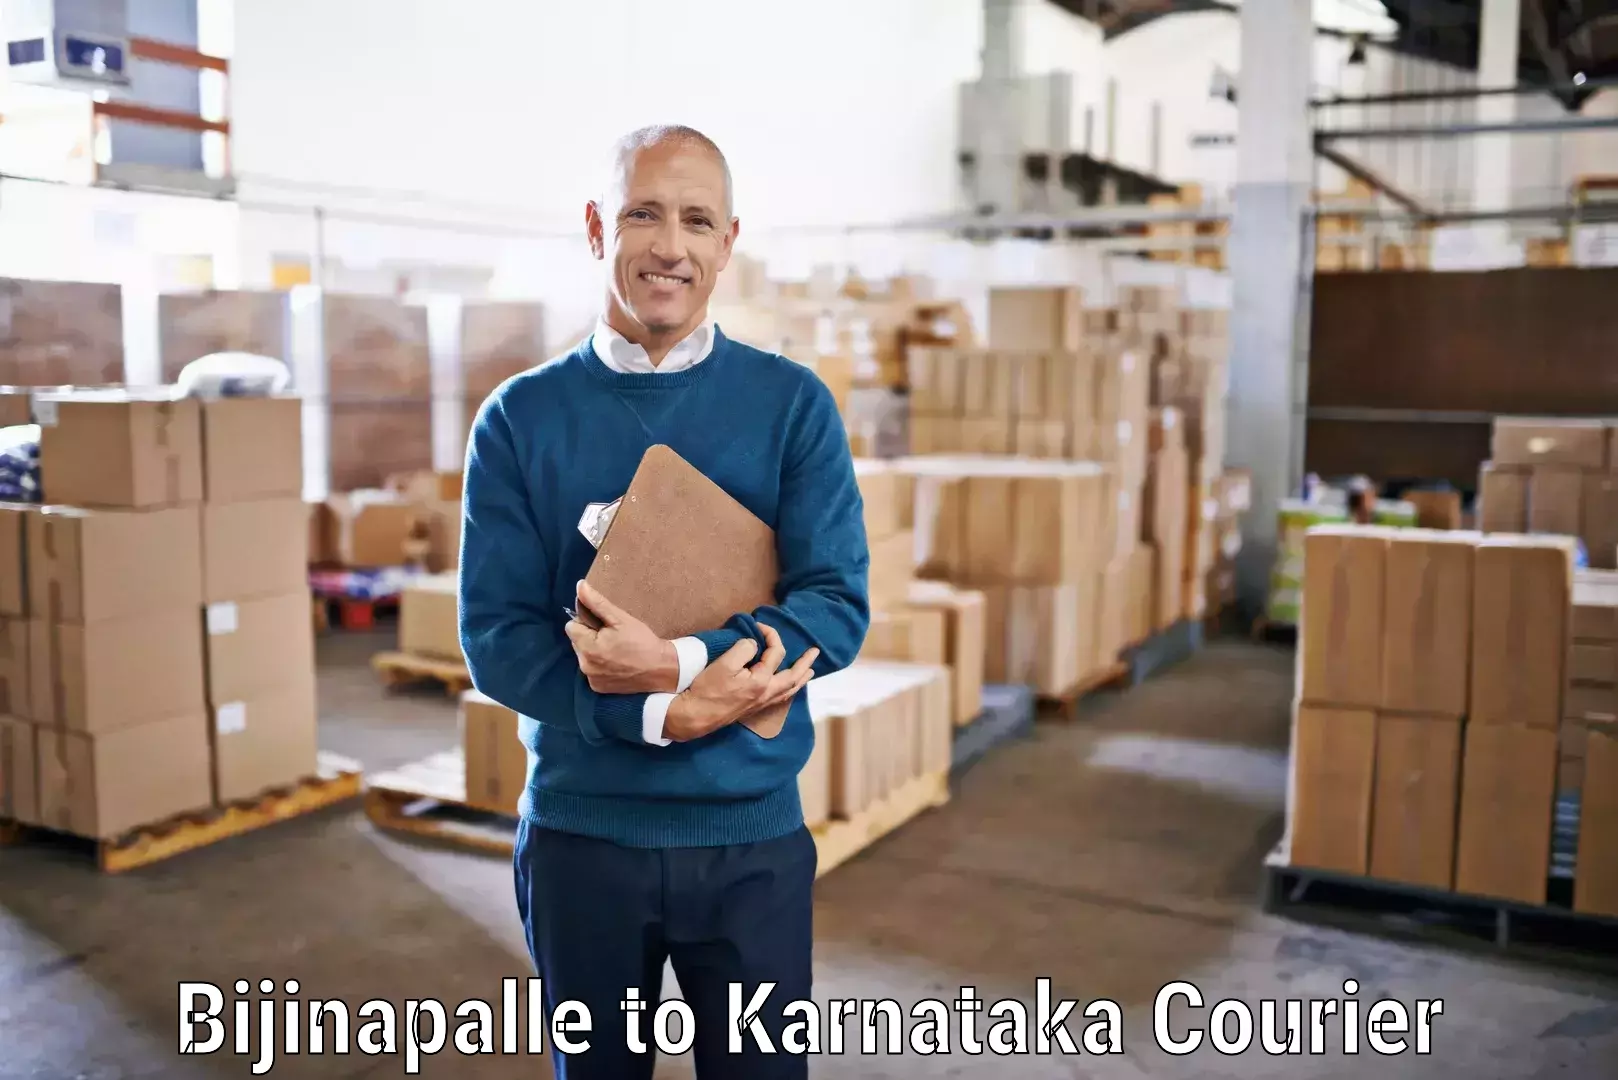 Next-generation courier services Bijinapalle to Kollegal